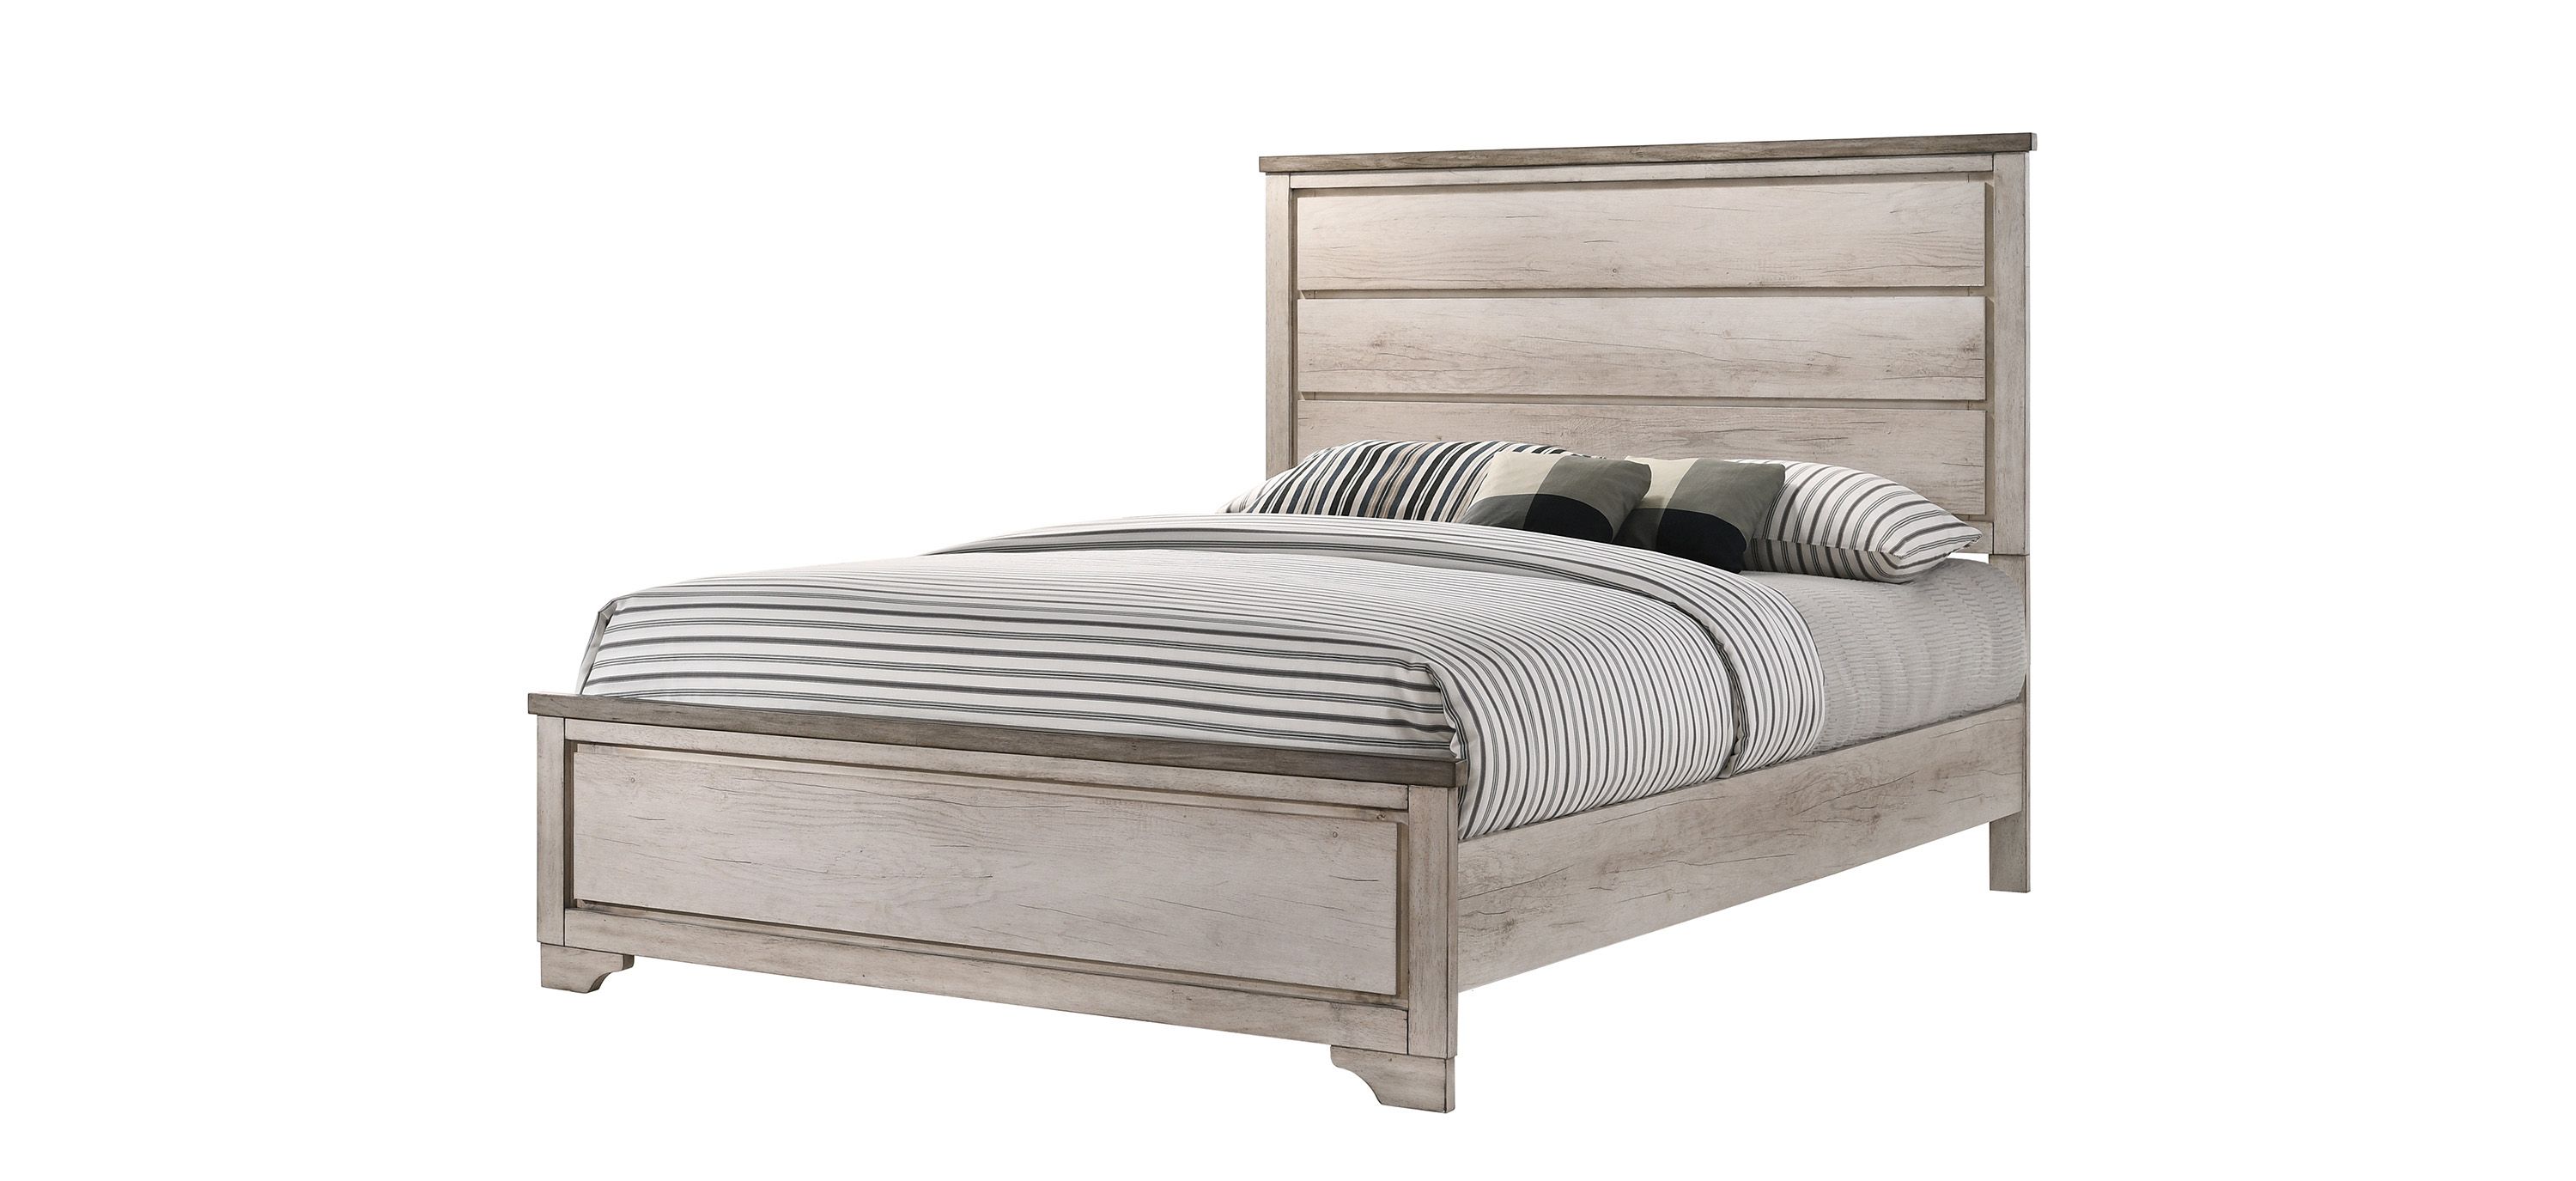 Patterson King Panel Bed